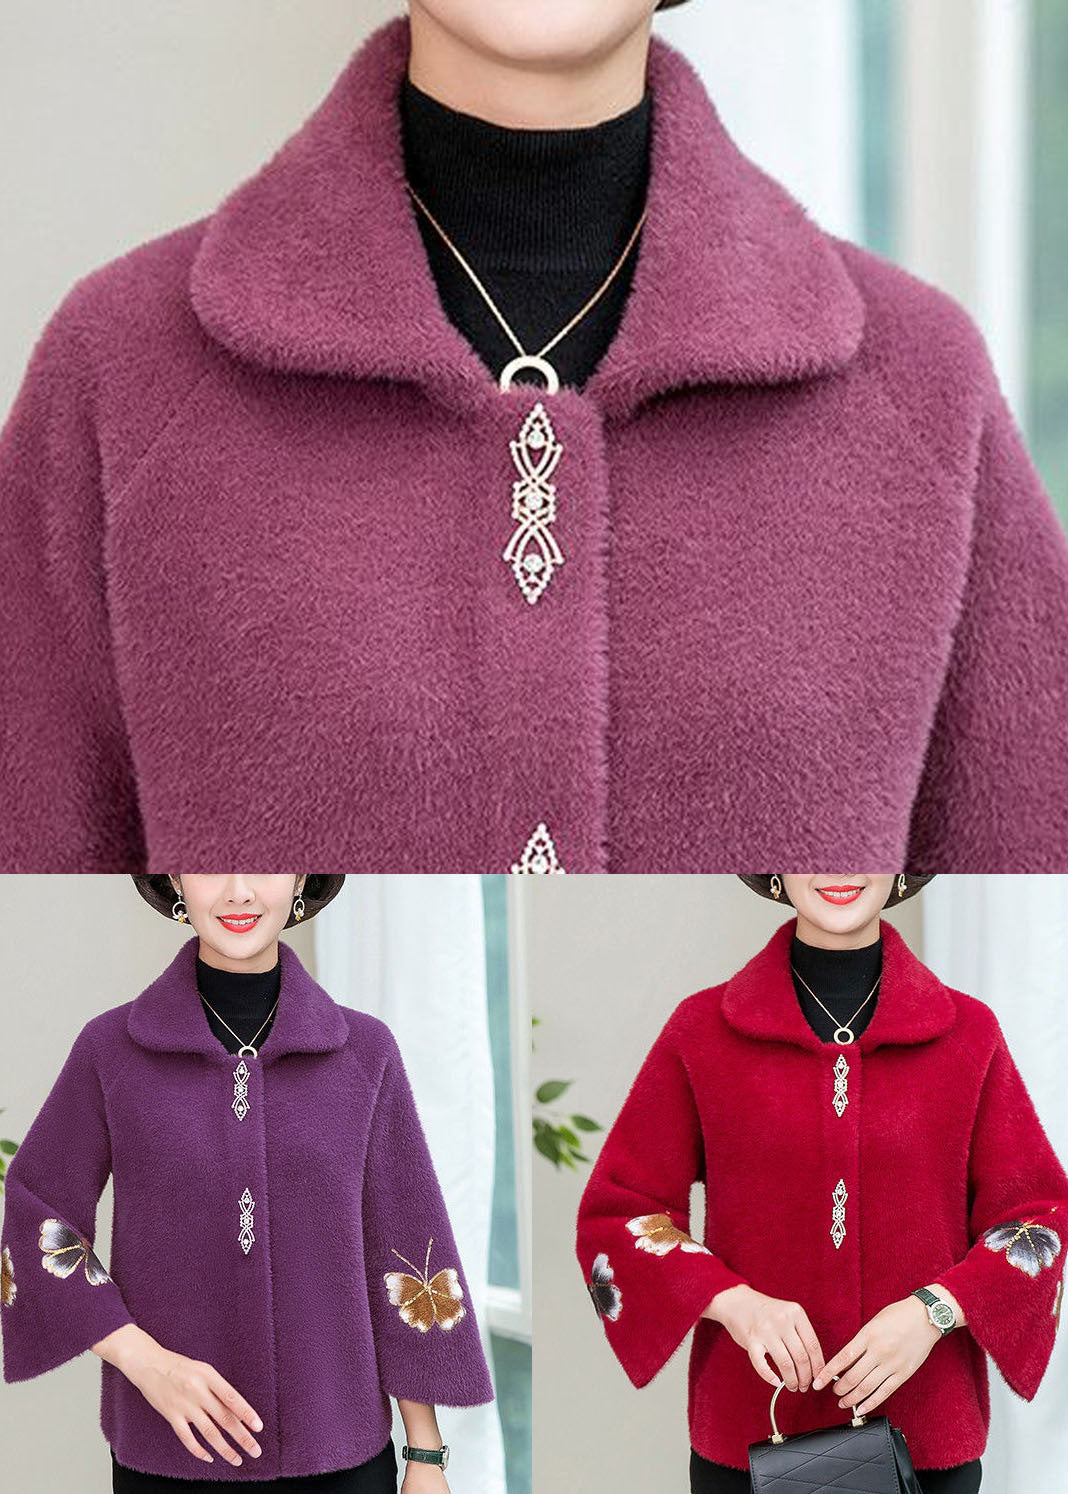 Beautiful Purple Square Collar Floral Mink Hair Knitted Coats Winter